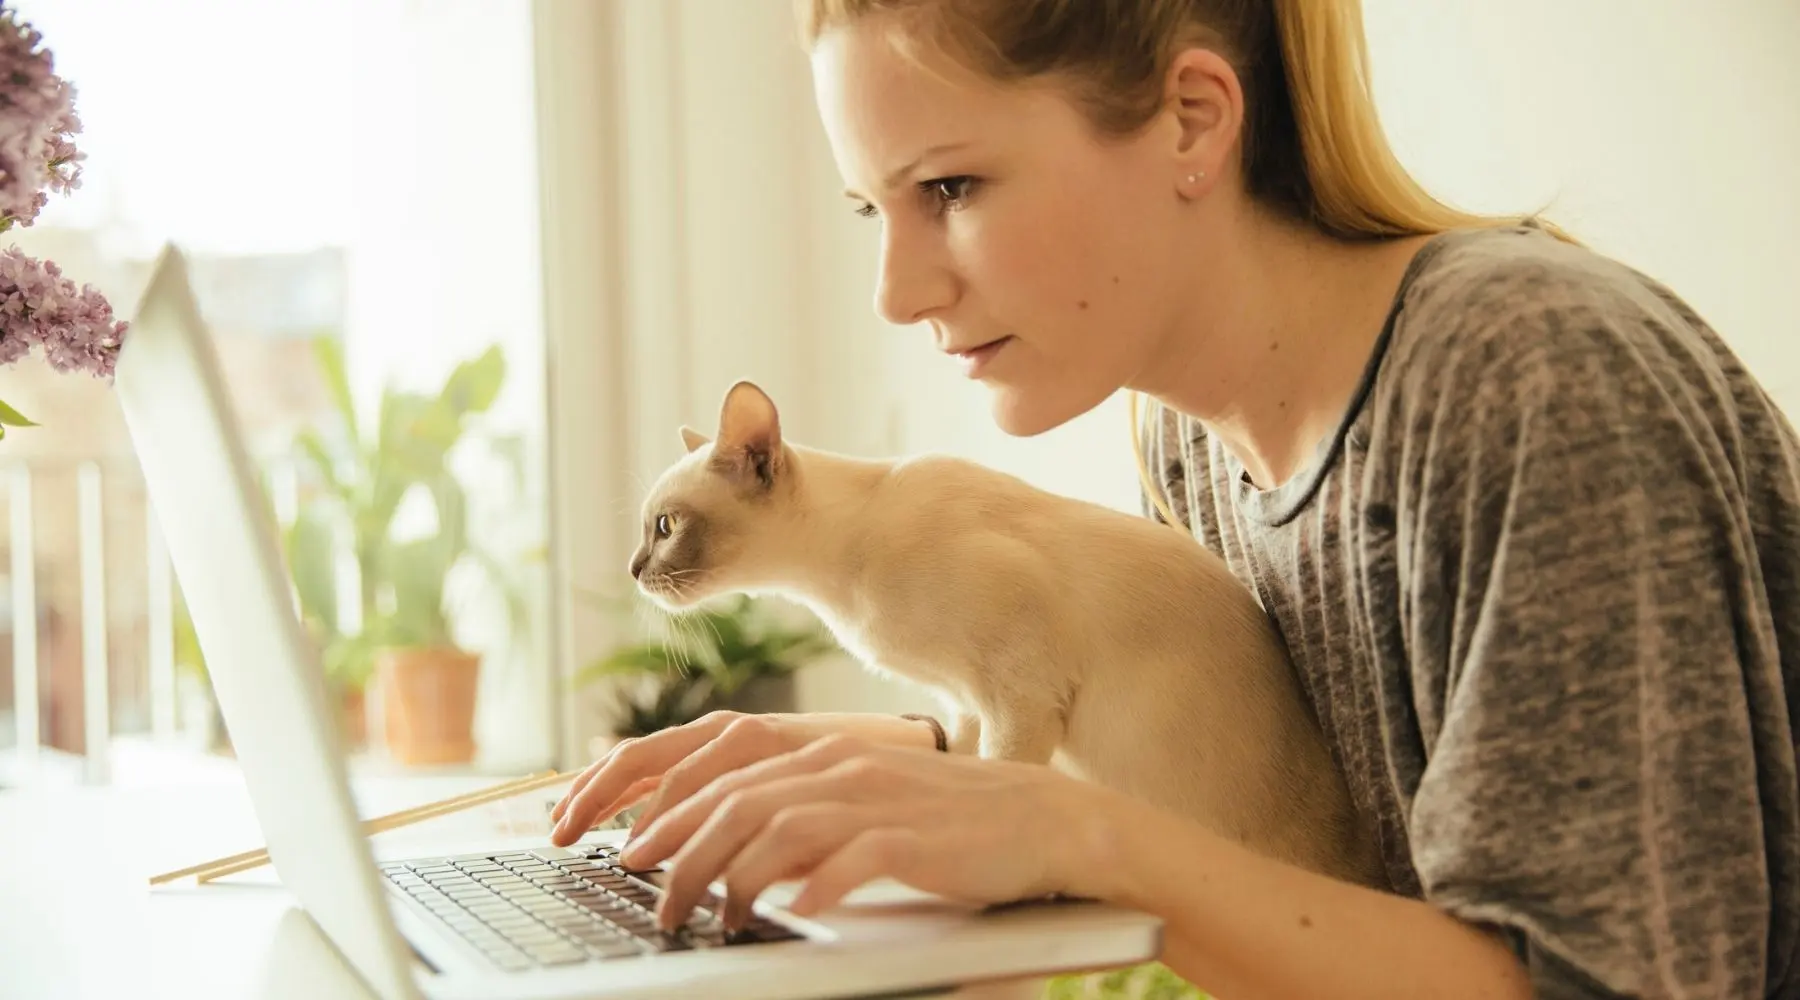 A woman and her cat look at a laptop.